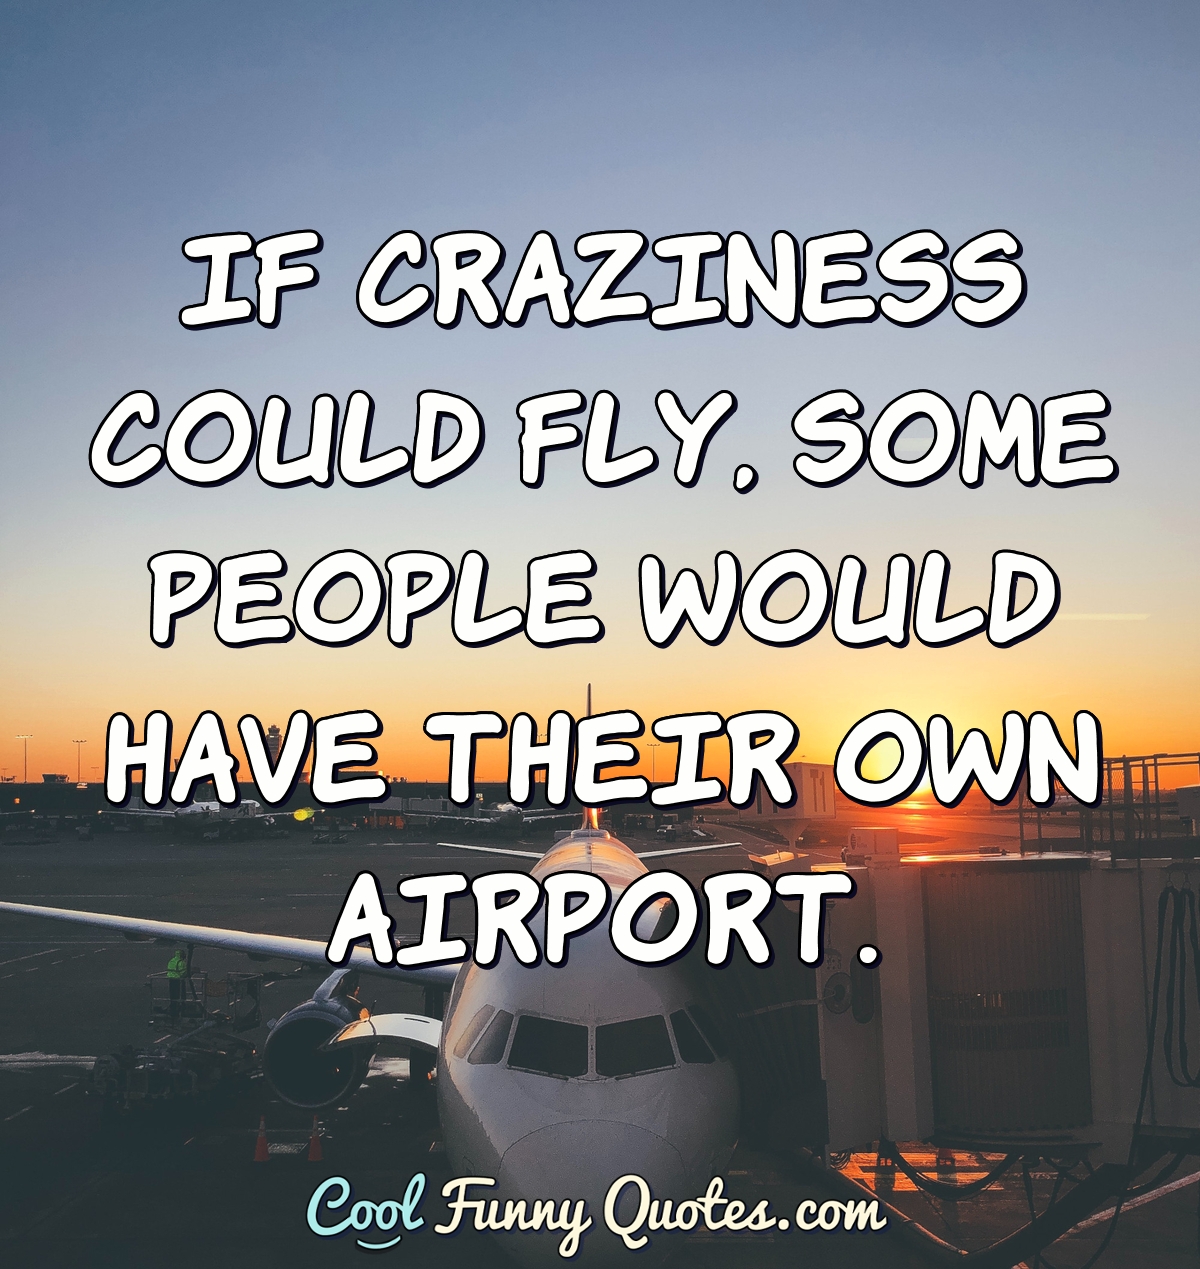 If craziness could fly, some people would have their own airport.